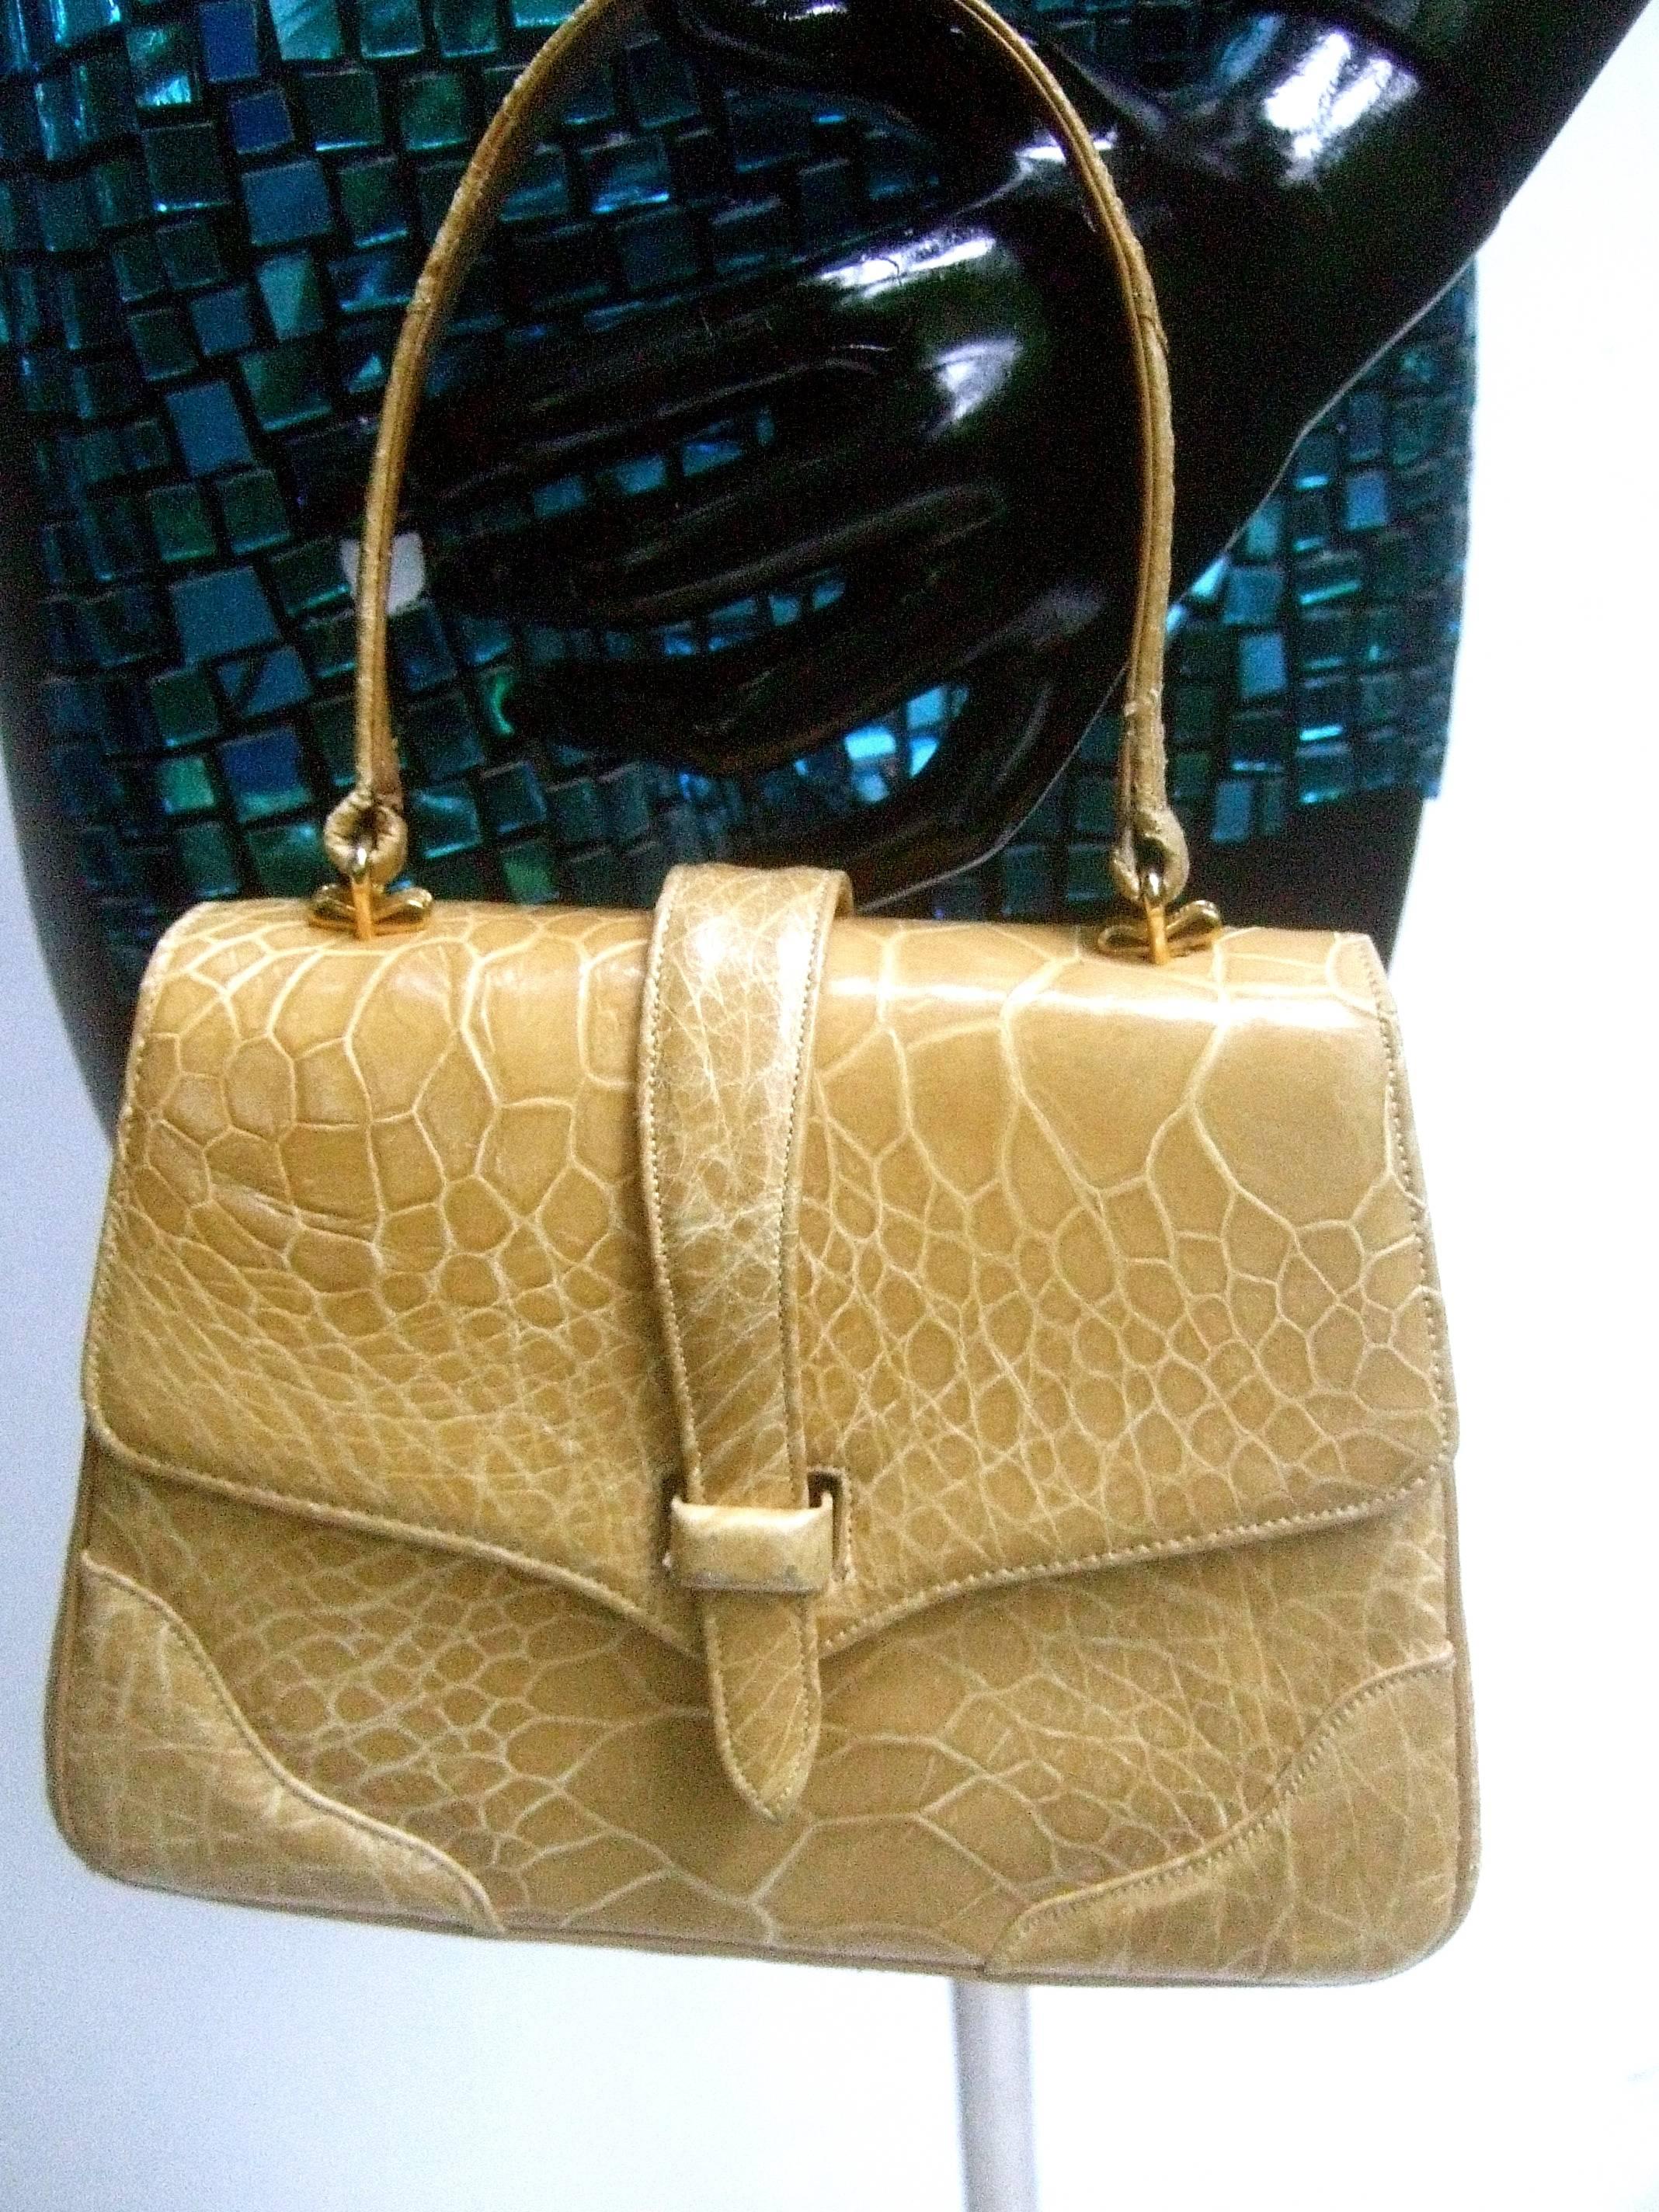 Lucille de Paris stylish turtle skin handbag c 1960
The chic retro handbag is designed with a tan 
reptile skin covering

The diminutive reptile handbag is lined in tan leather 
designed with dual slip pocket compartments 
and a zippered compartment